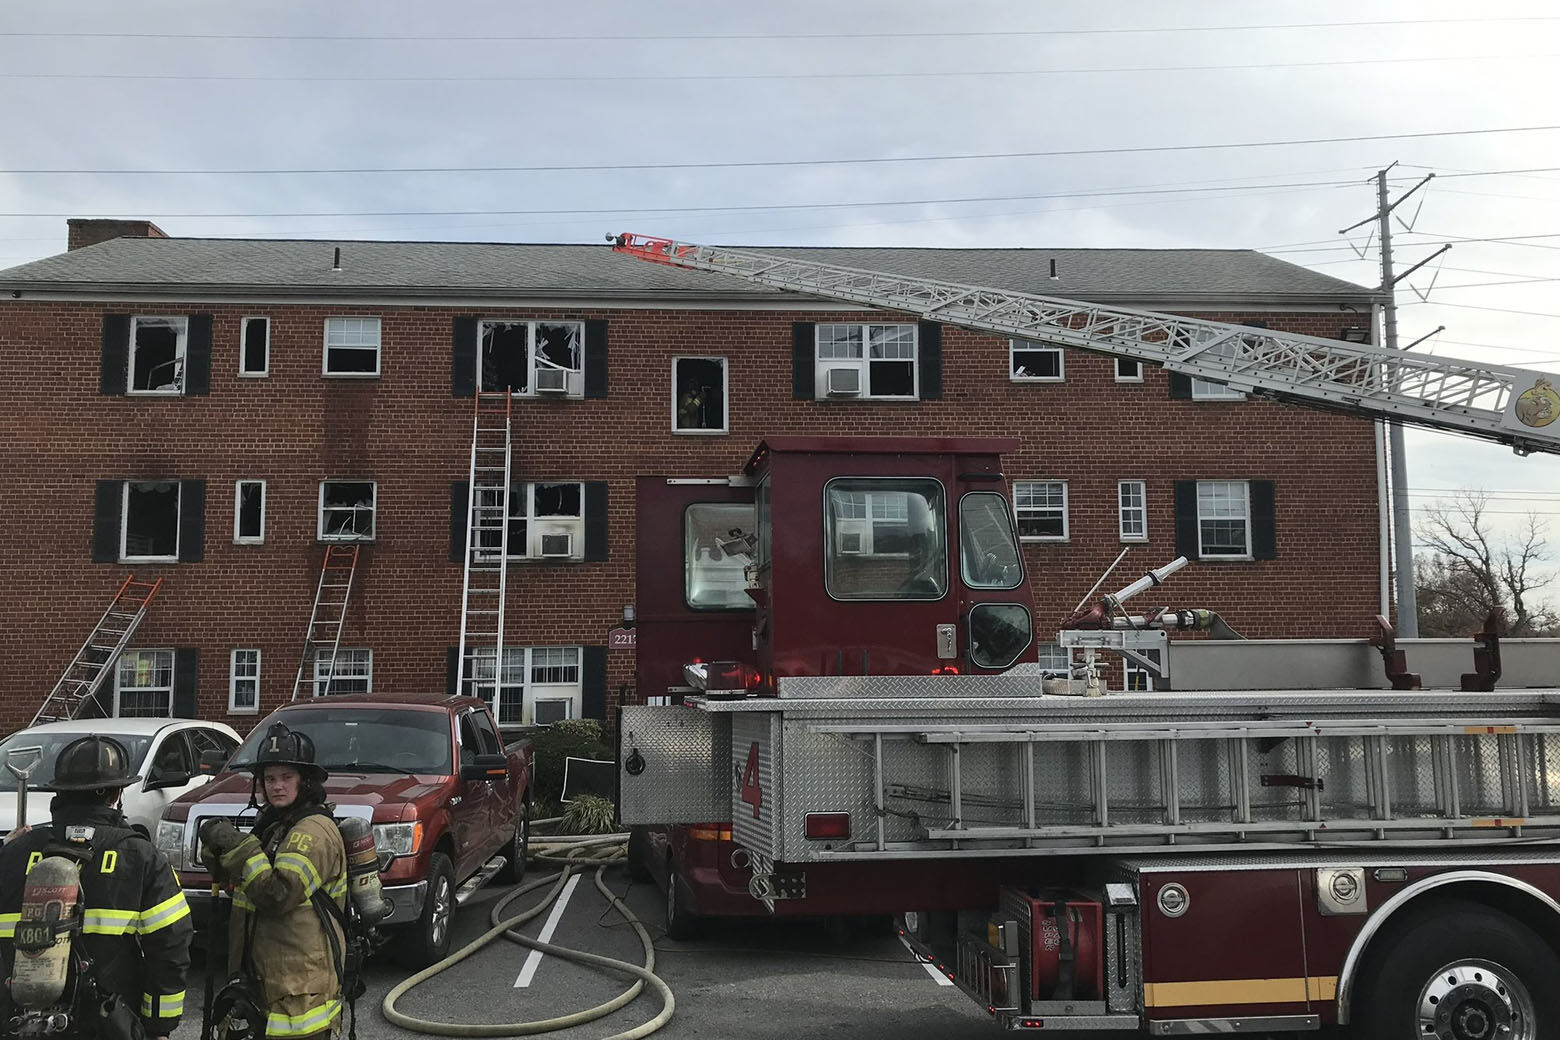 

<p>At least 45 people were displaced by a fire in an apartment building in Langley Park on Thanksgiving Day.  (Courtesy of Prince George’s County Fire Department)</p>
<p>“/><figcaption>
<p>                              At least 45 people were displaced by a fire in an apartment building in Langley Park on Thanksgiving Day.  (Courtesy Prince George’s County Fire Department)<br />
                            </figcaption>
<p>                                Courtesy of Prince George’s County                            </p>
</figure>
<figure>
<p>                                                    <img src=